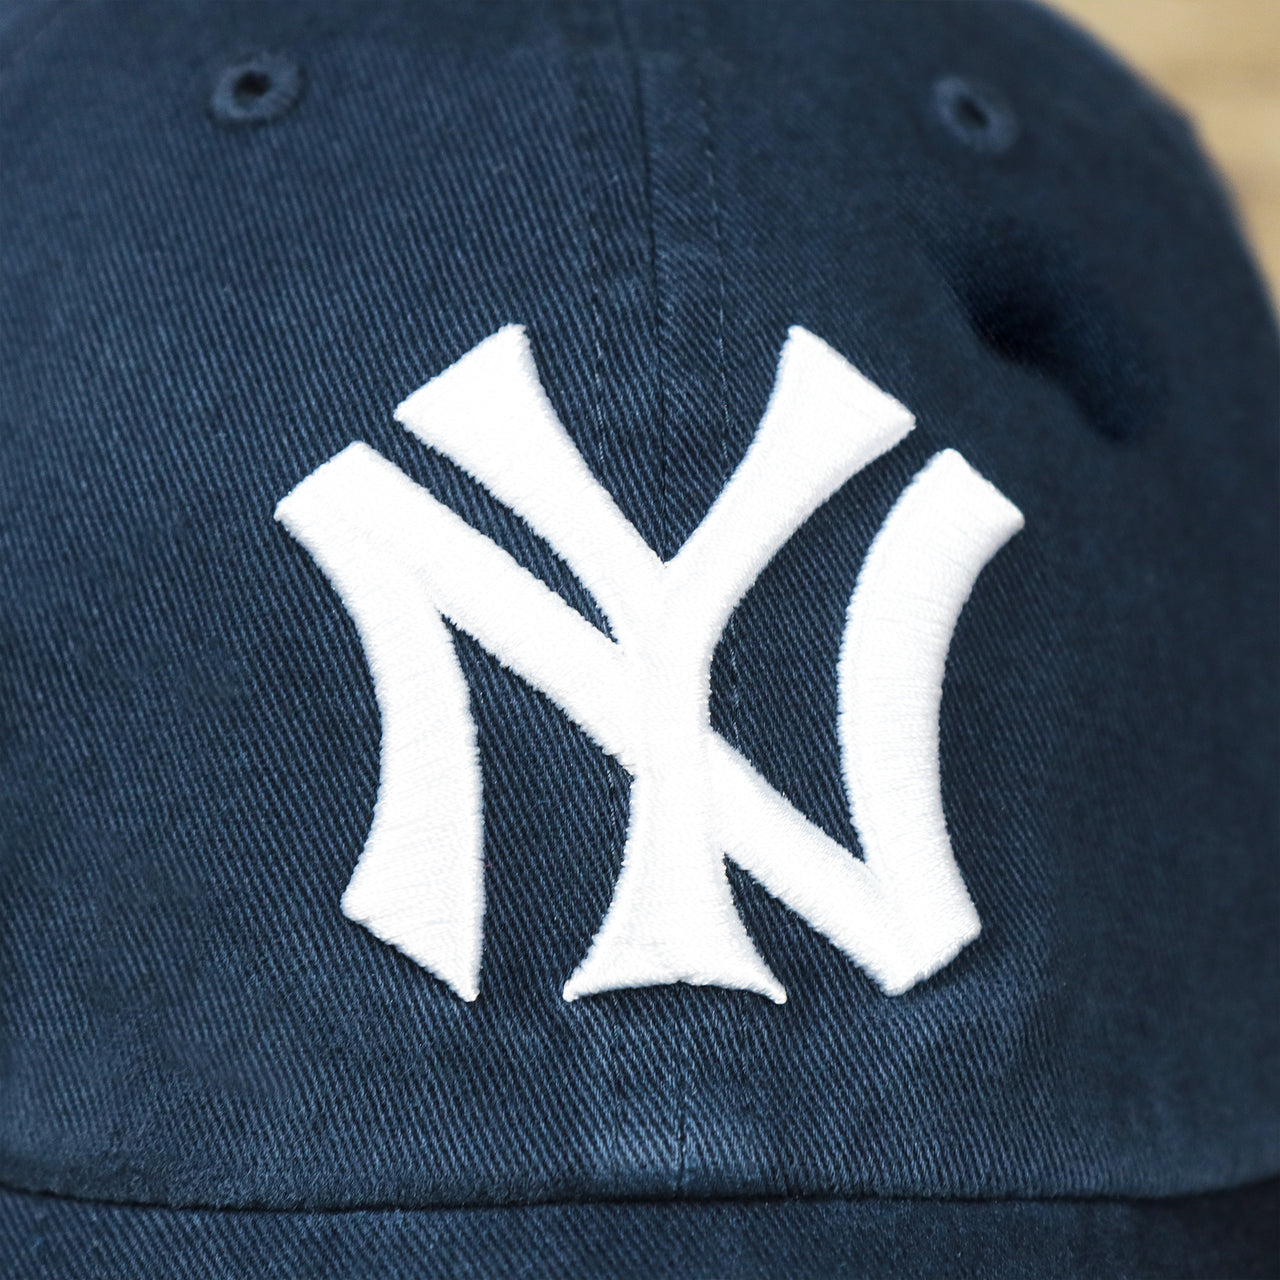 The Yankees Logo on the Cooperstown New York Yankees Retro Yankees Logo Dad Hat | Navy Dad Hat